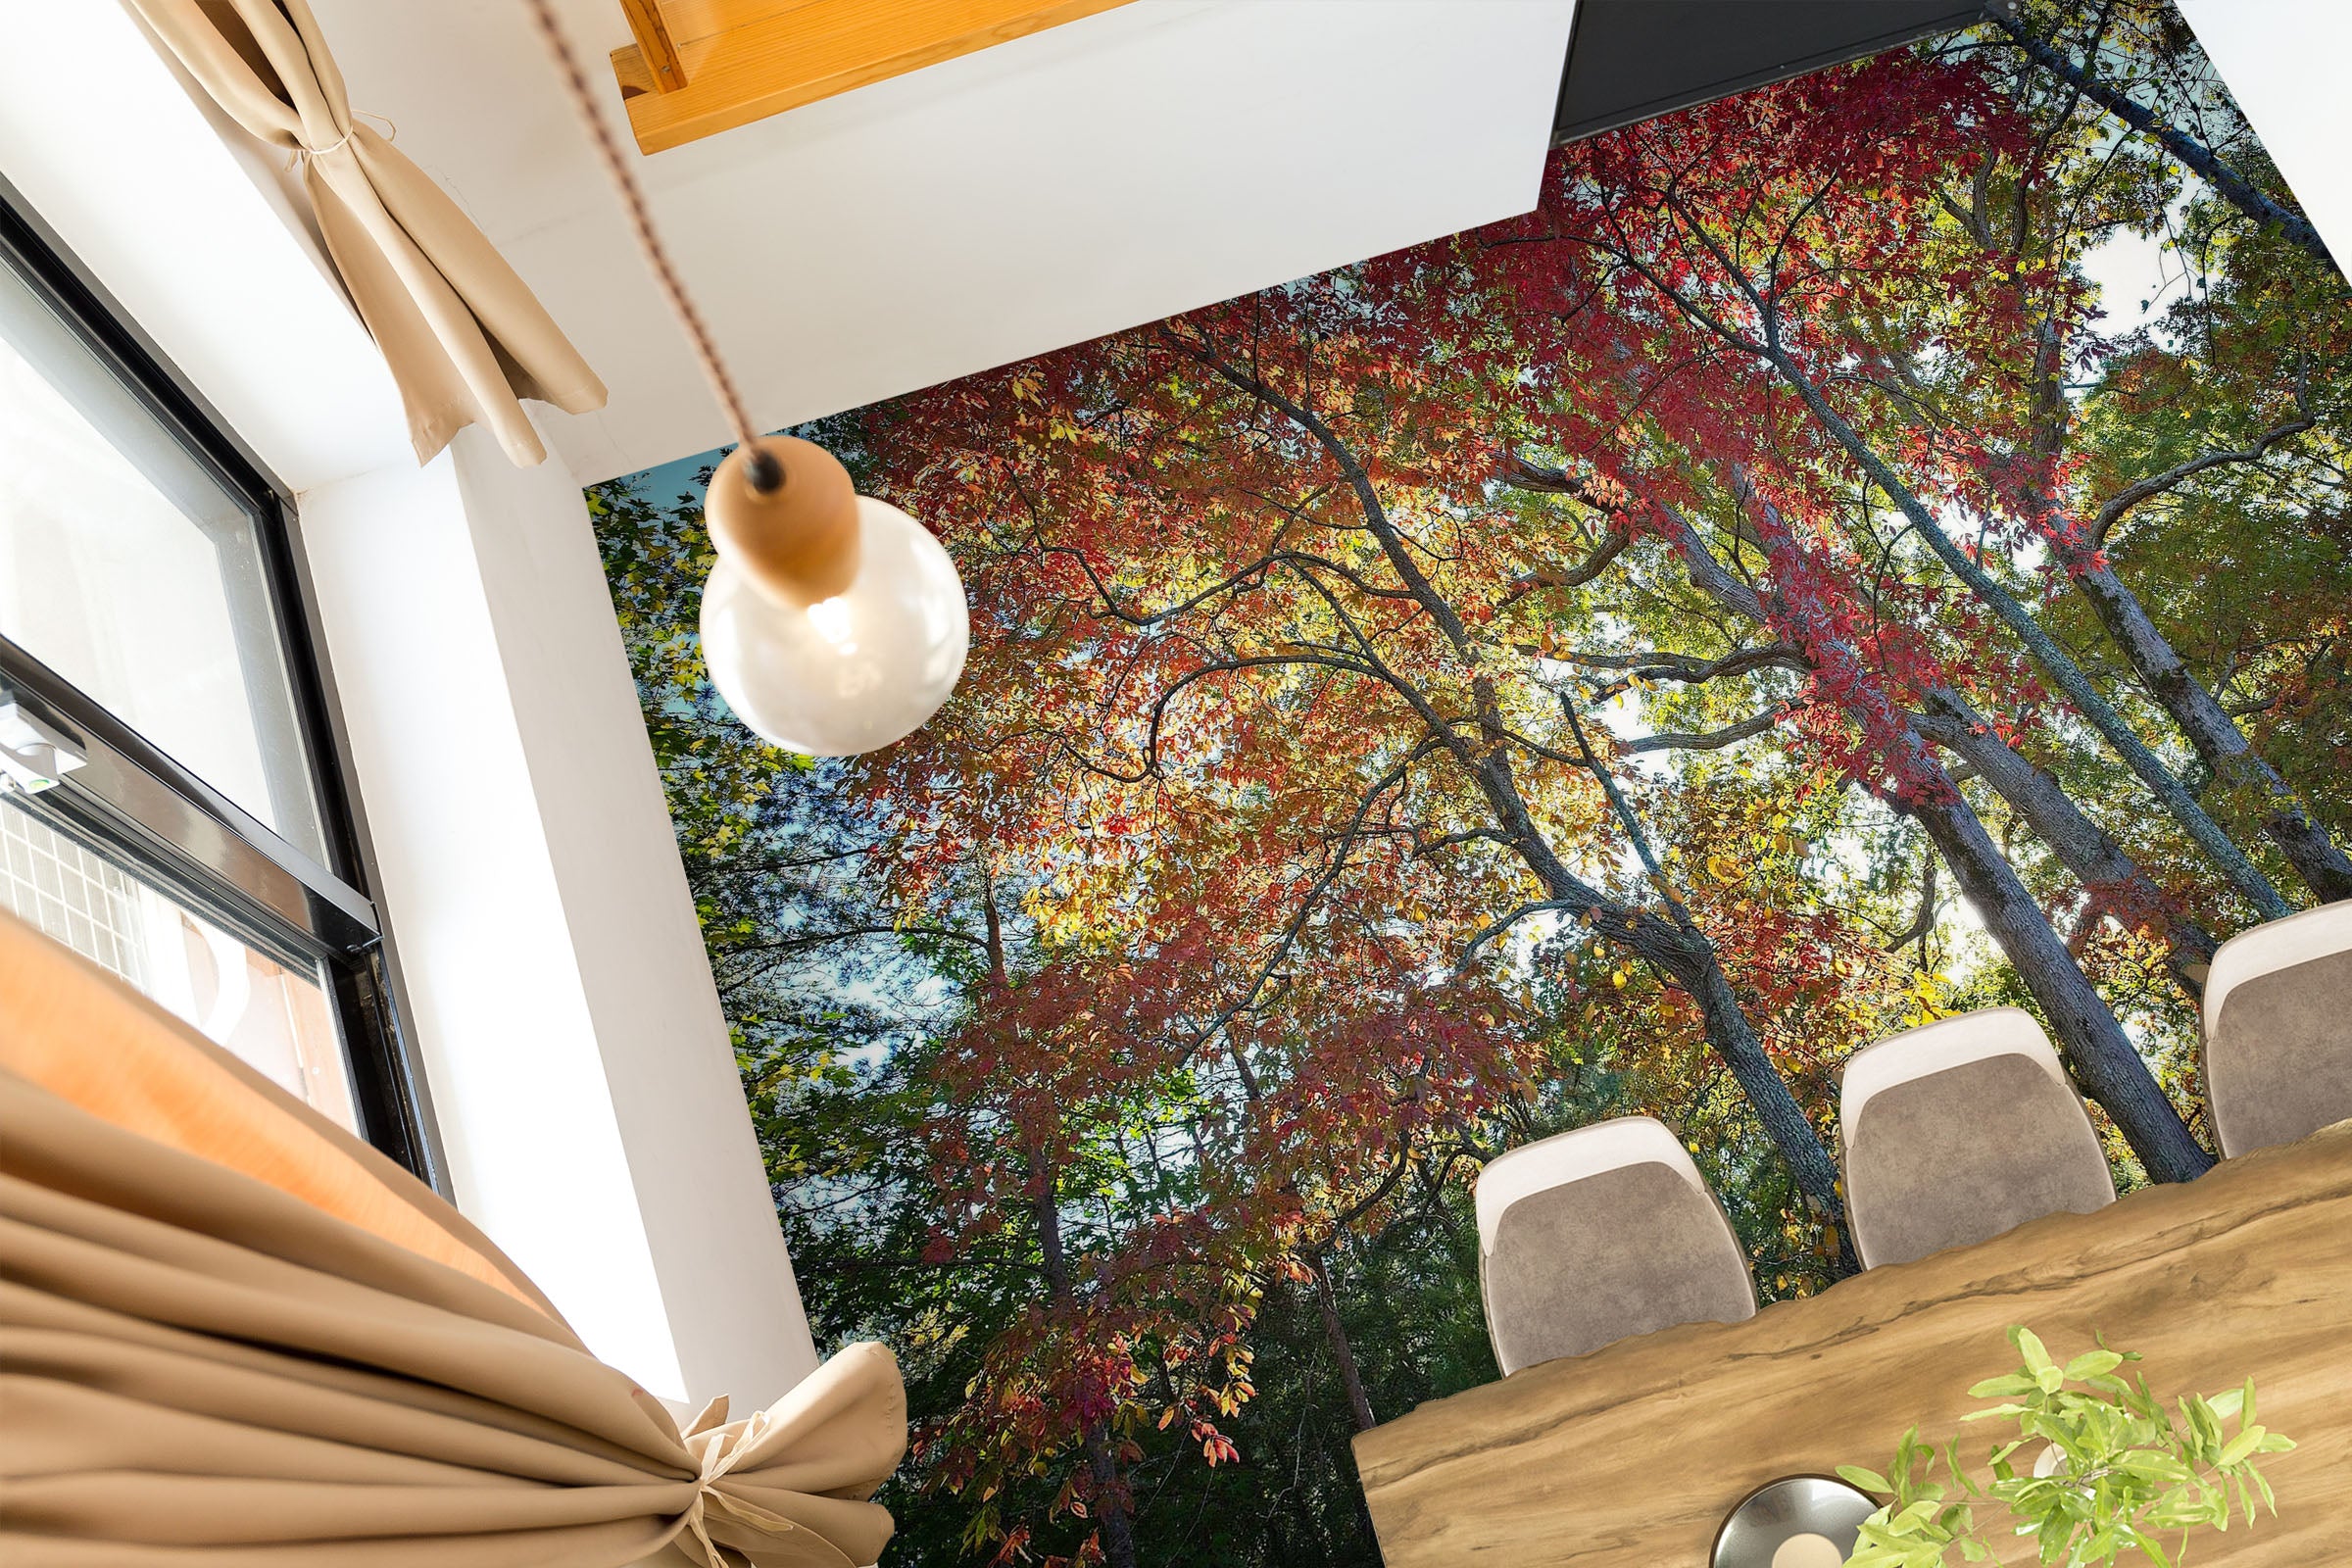 3D Forest 98189 Kathy Barefield Floor Mural  Wallpaper Murals Self-Adhesive Removable Print Epoxy